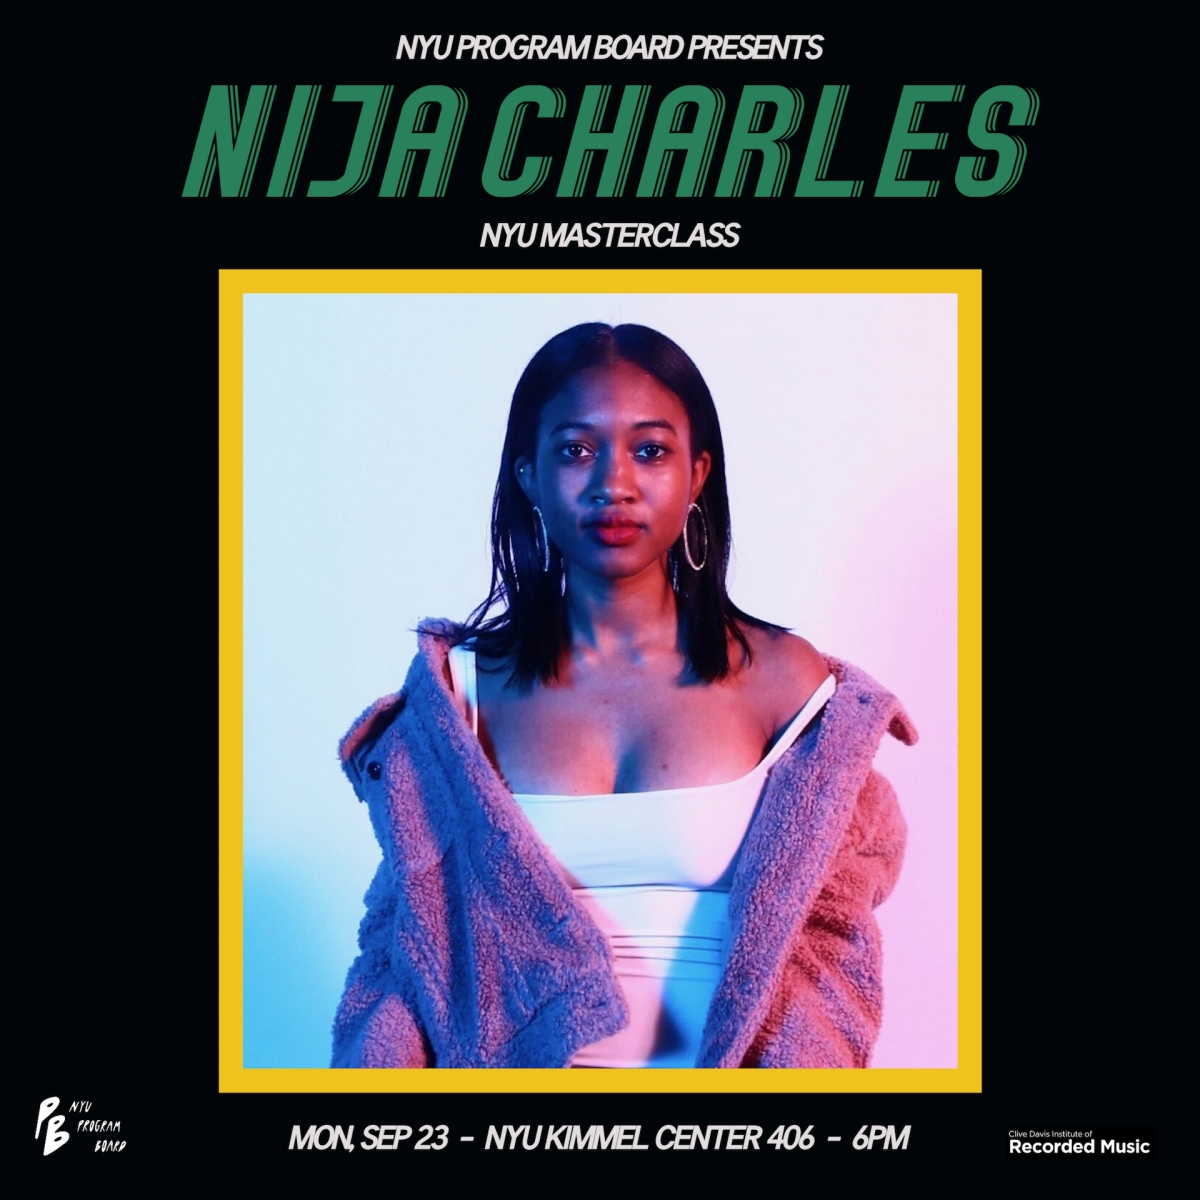 flyer for NYU masterclass event with former student, NIJA CHARLES